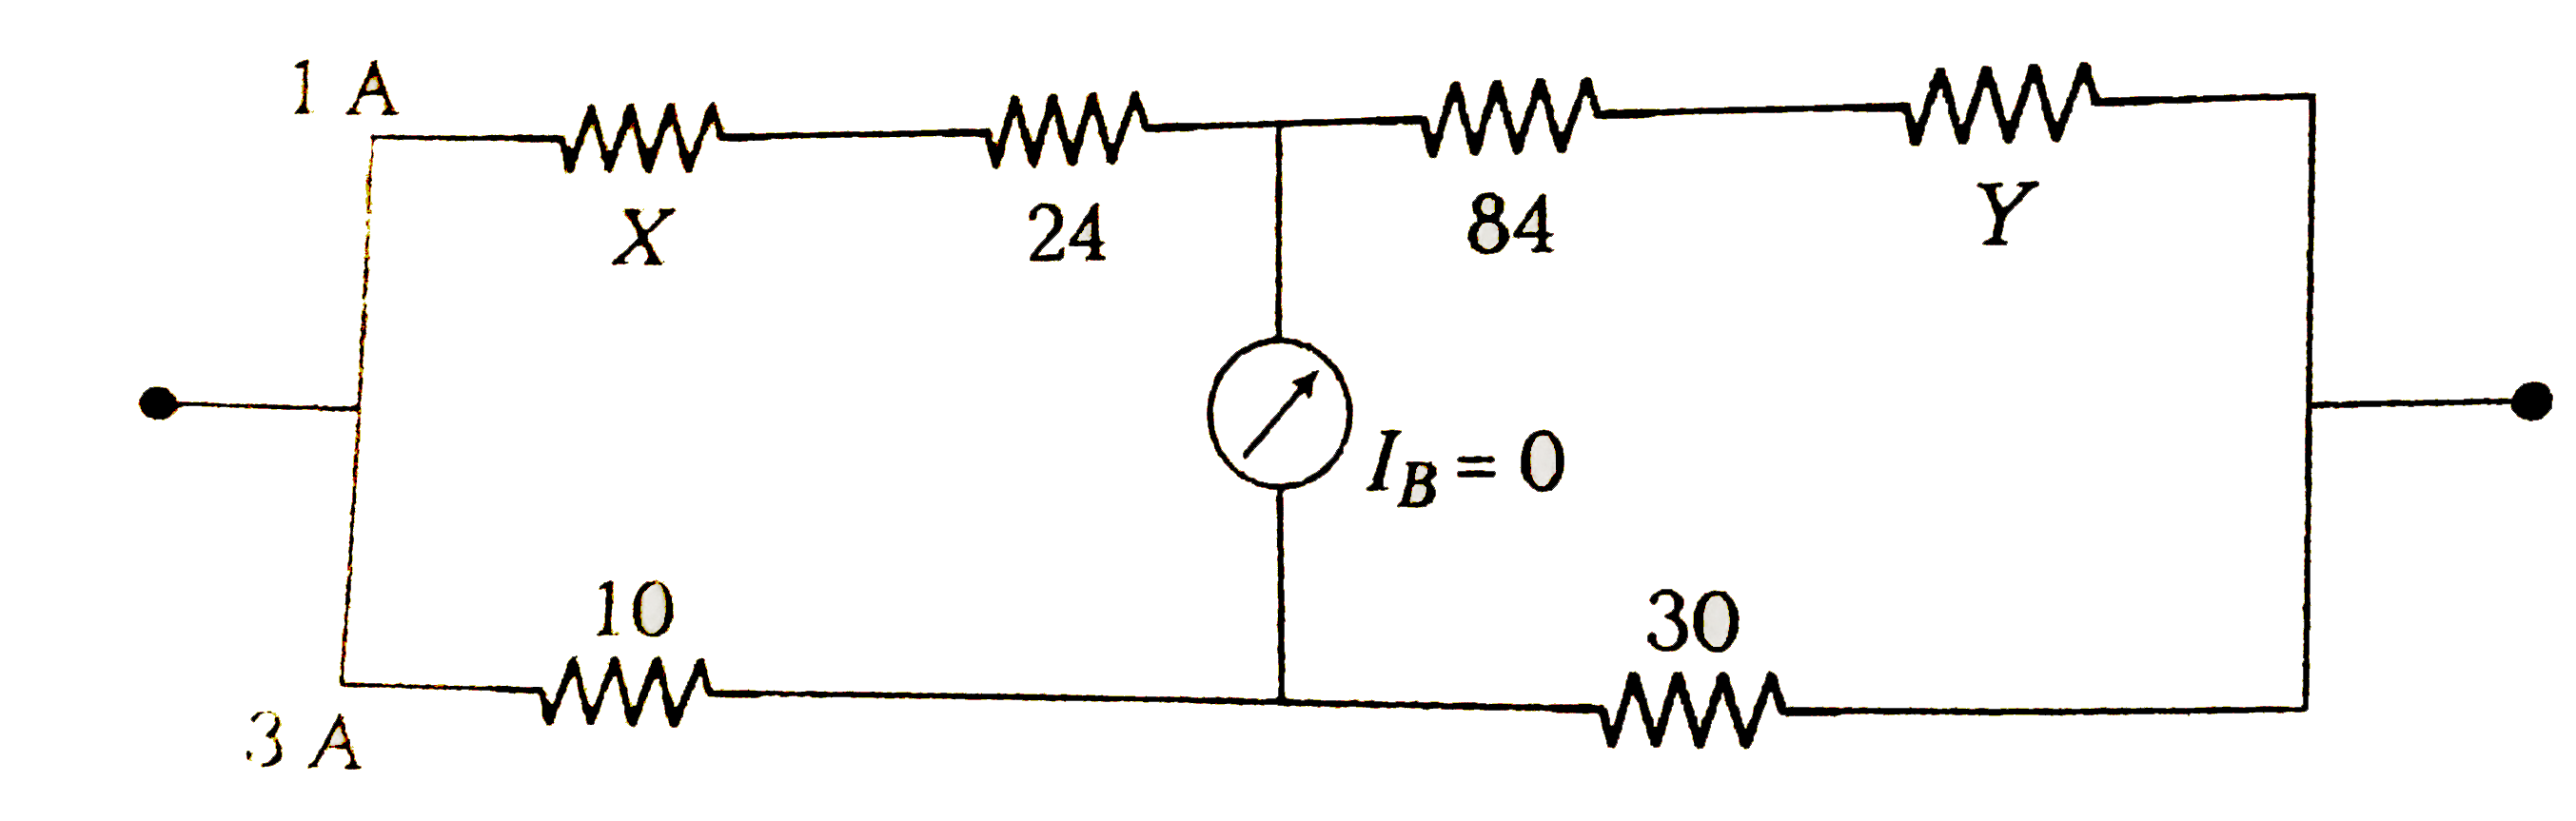 In the given circuit, the resistances are given in ohm. The  current through the 10Omega resistance is 3 A while that through the resistance X is 1 A. No current passes through the galavanometer. The values of the unknown resistances X and Y are respectively (in ohm)